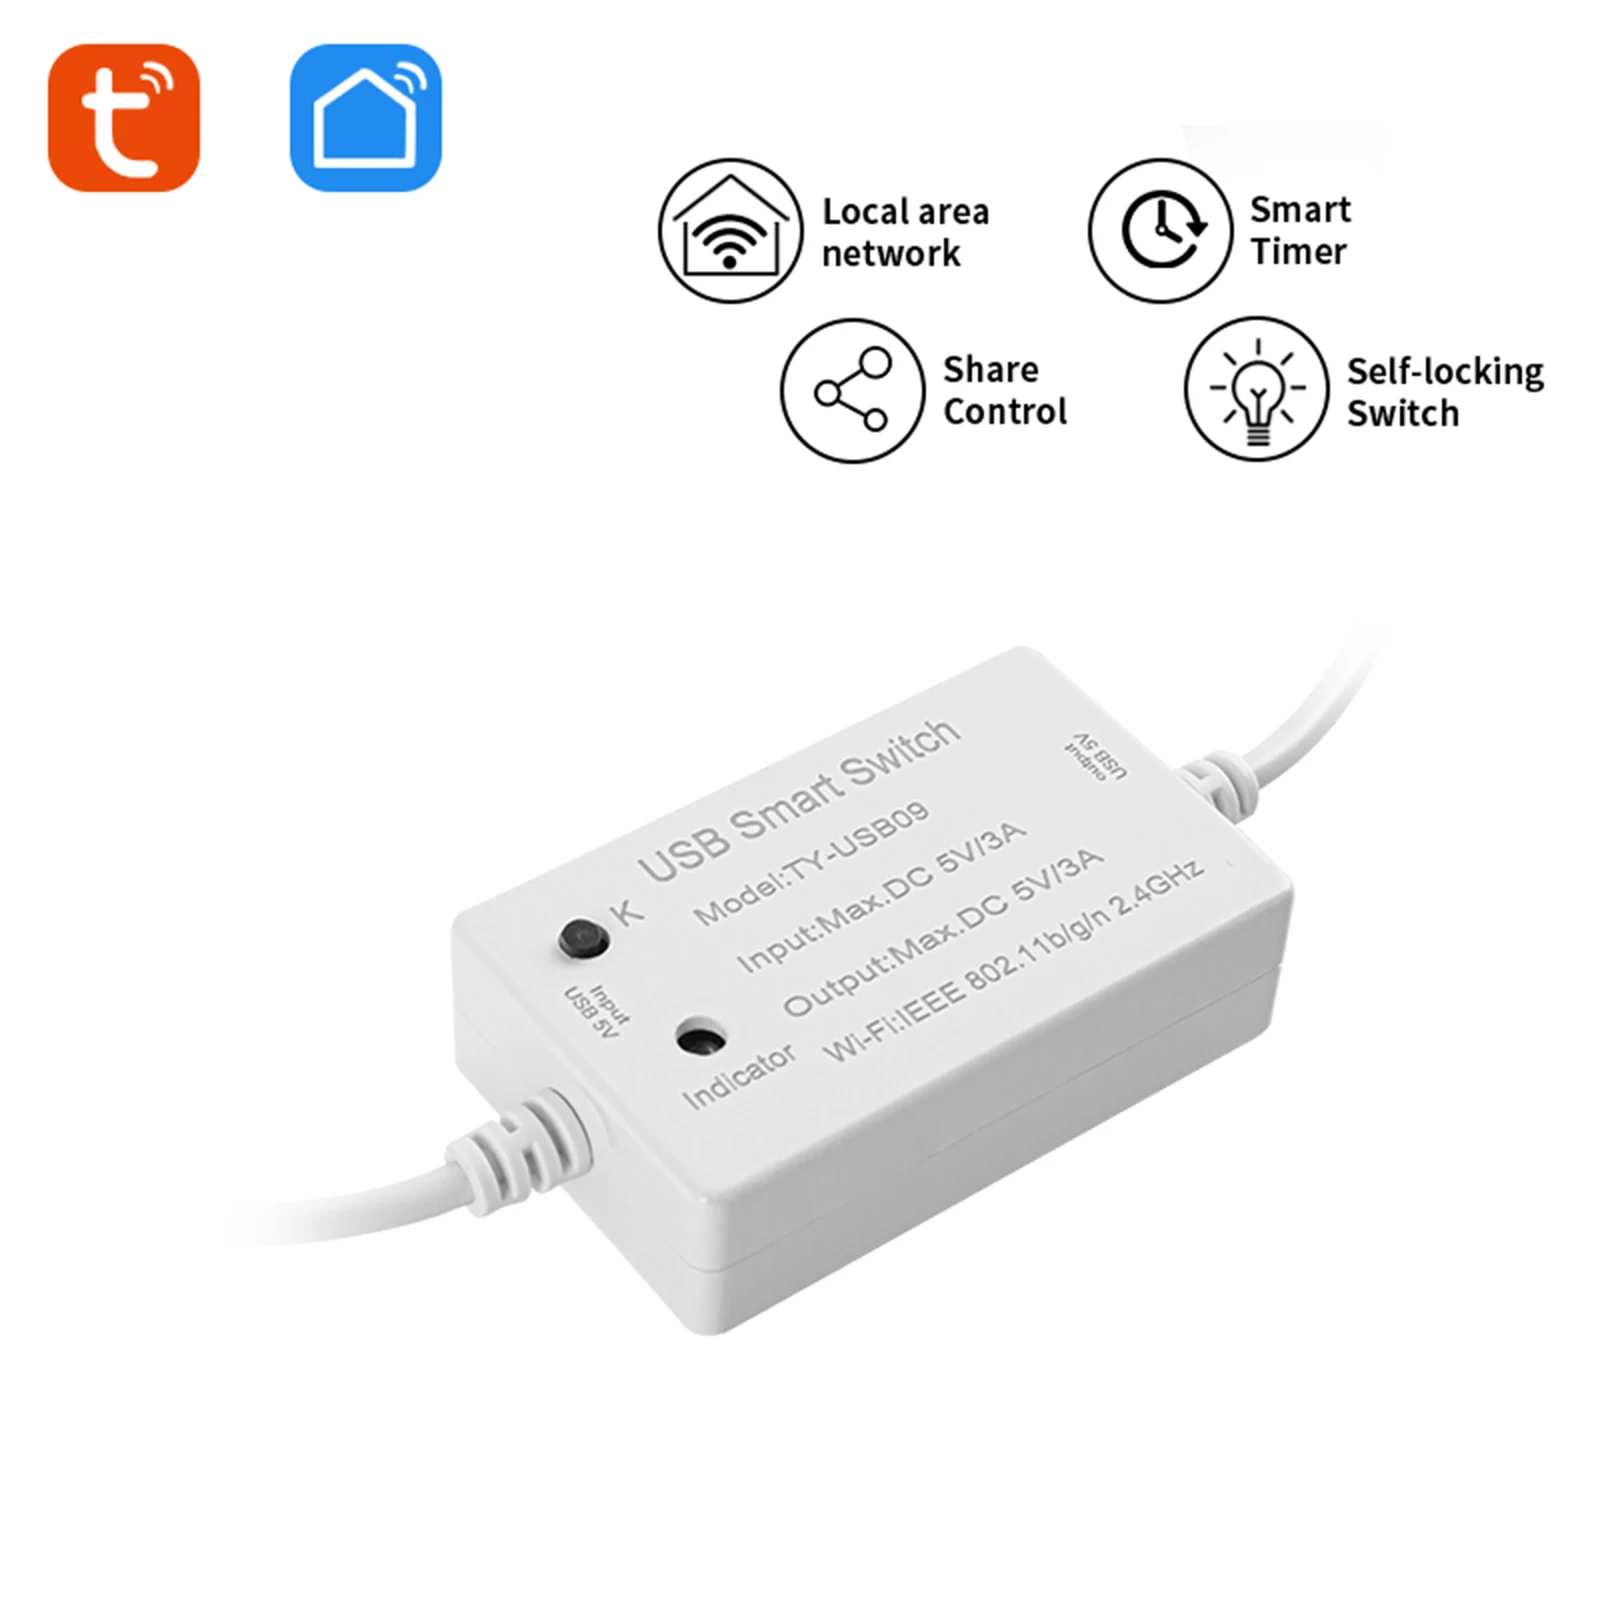 

USB Smart Switch WIFI Controller Tuya Circuit Breaker Timer Voice Control Supported APP Remote Control Real Time Monitoring